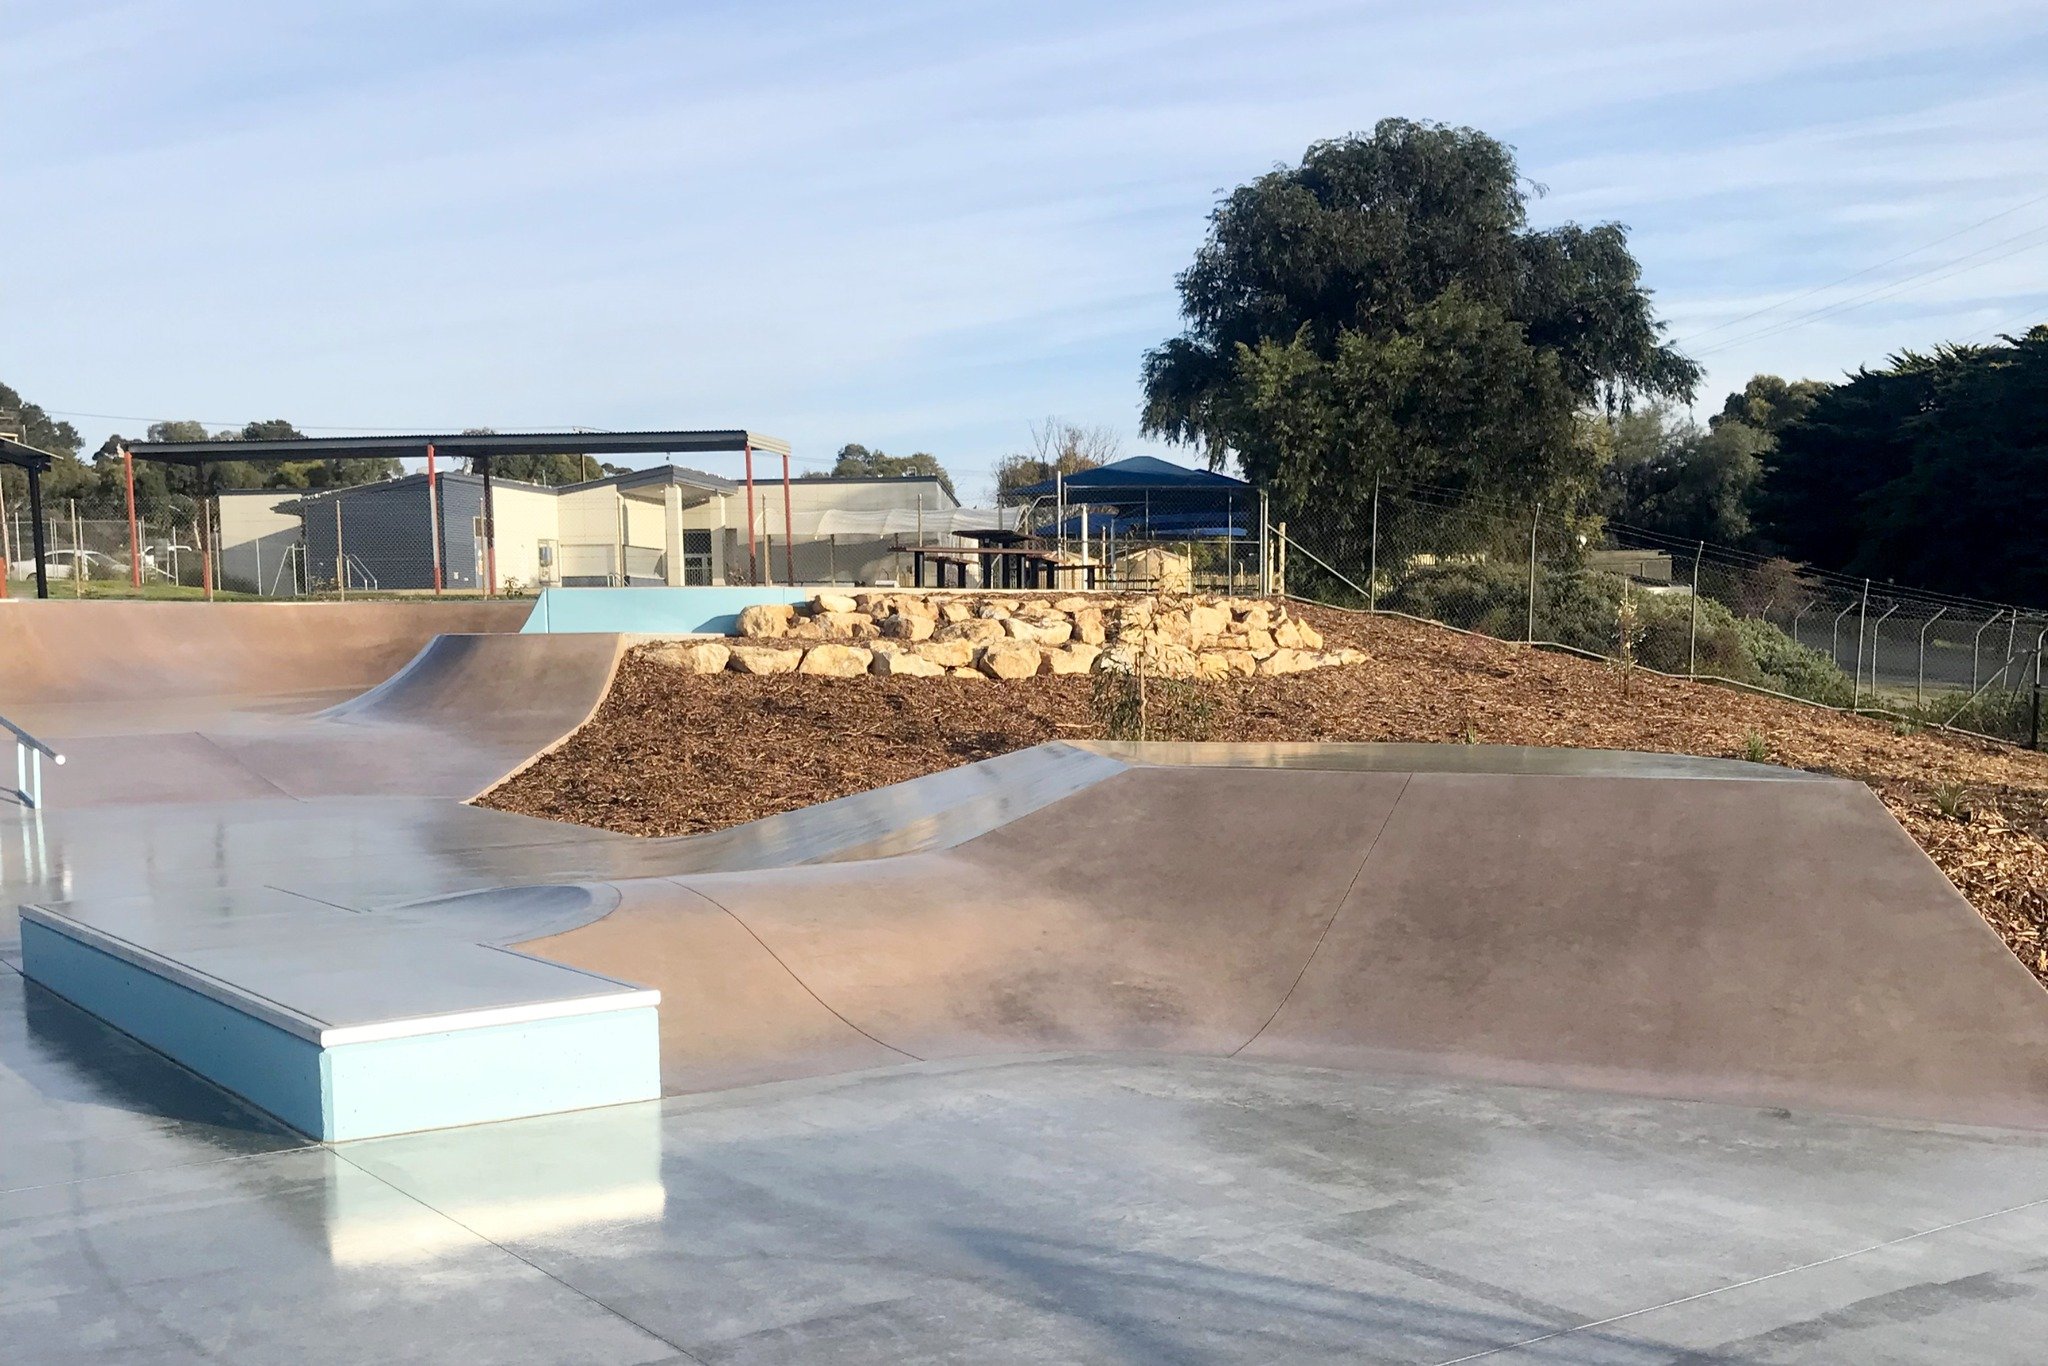 Eudunda Skatepark was finished late last year by @trinityskateparks - Looking smooth and well spaced out. Get there when you can!